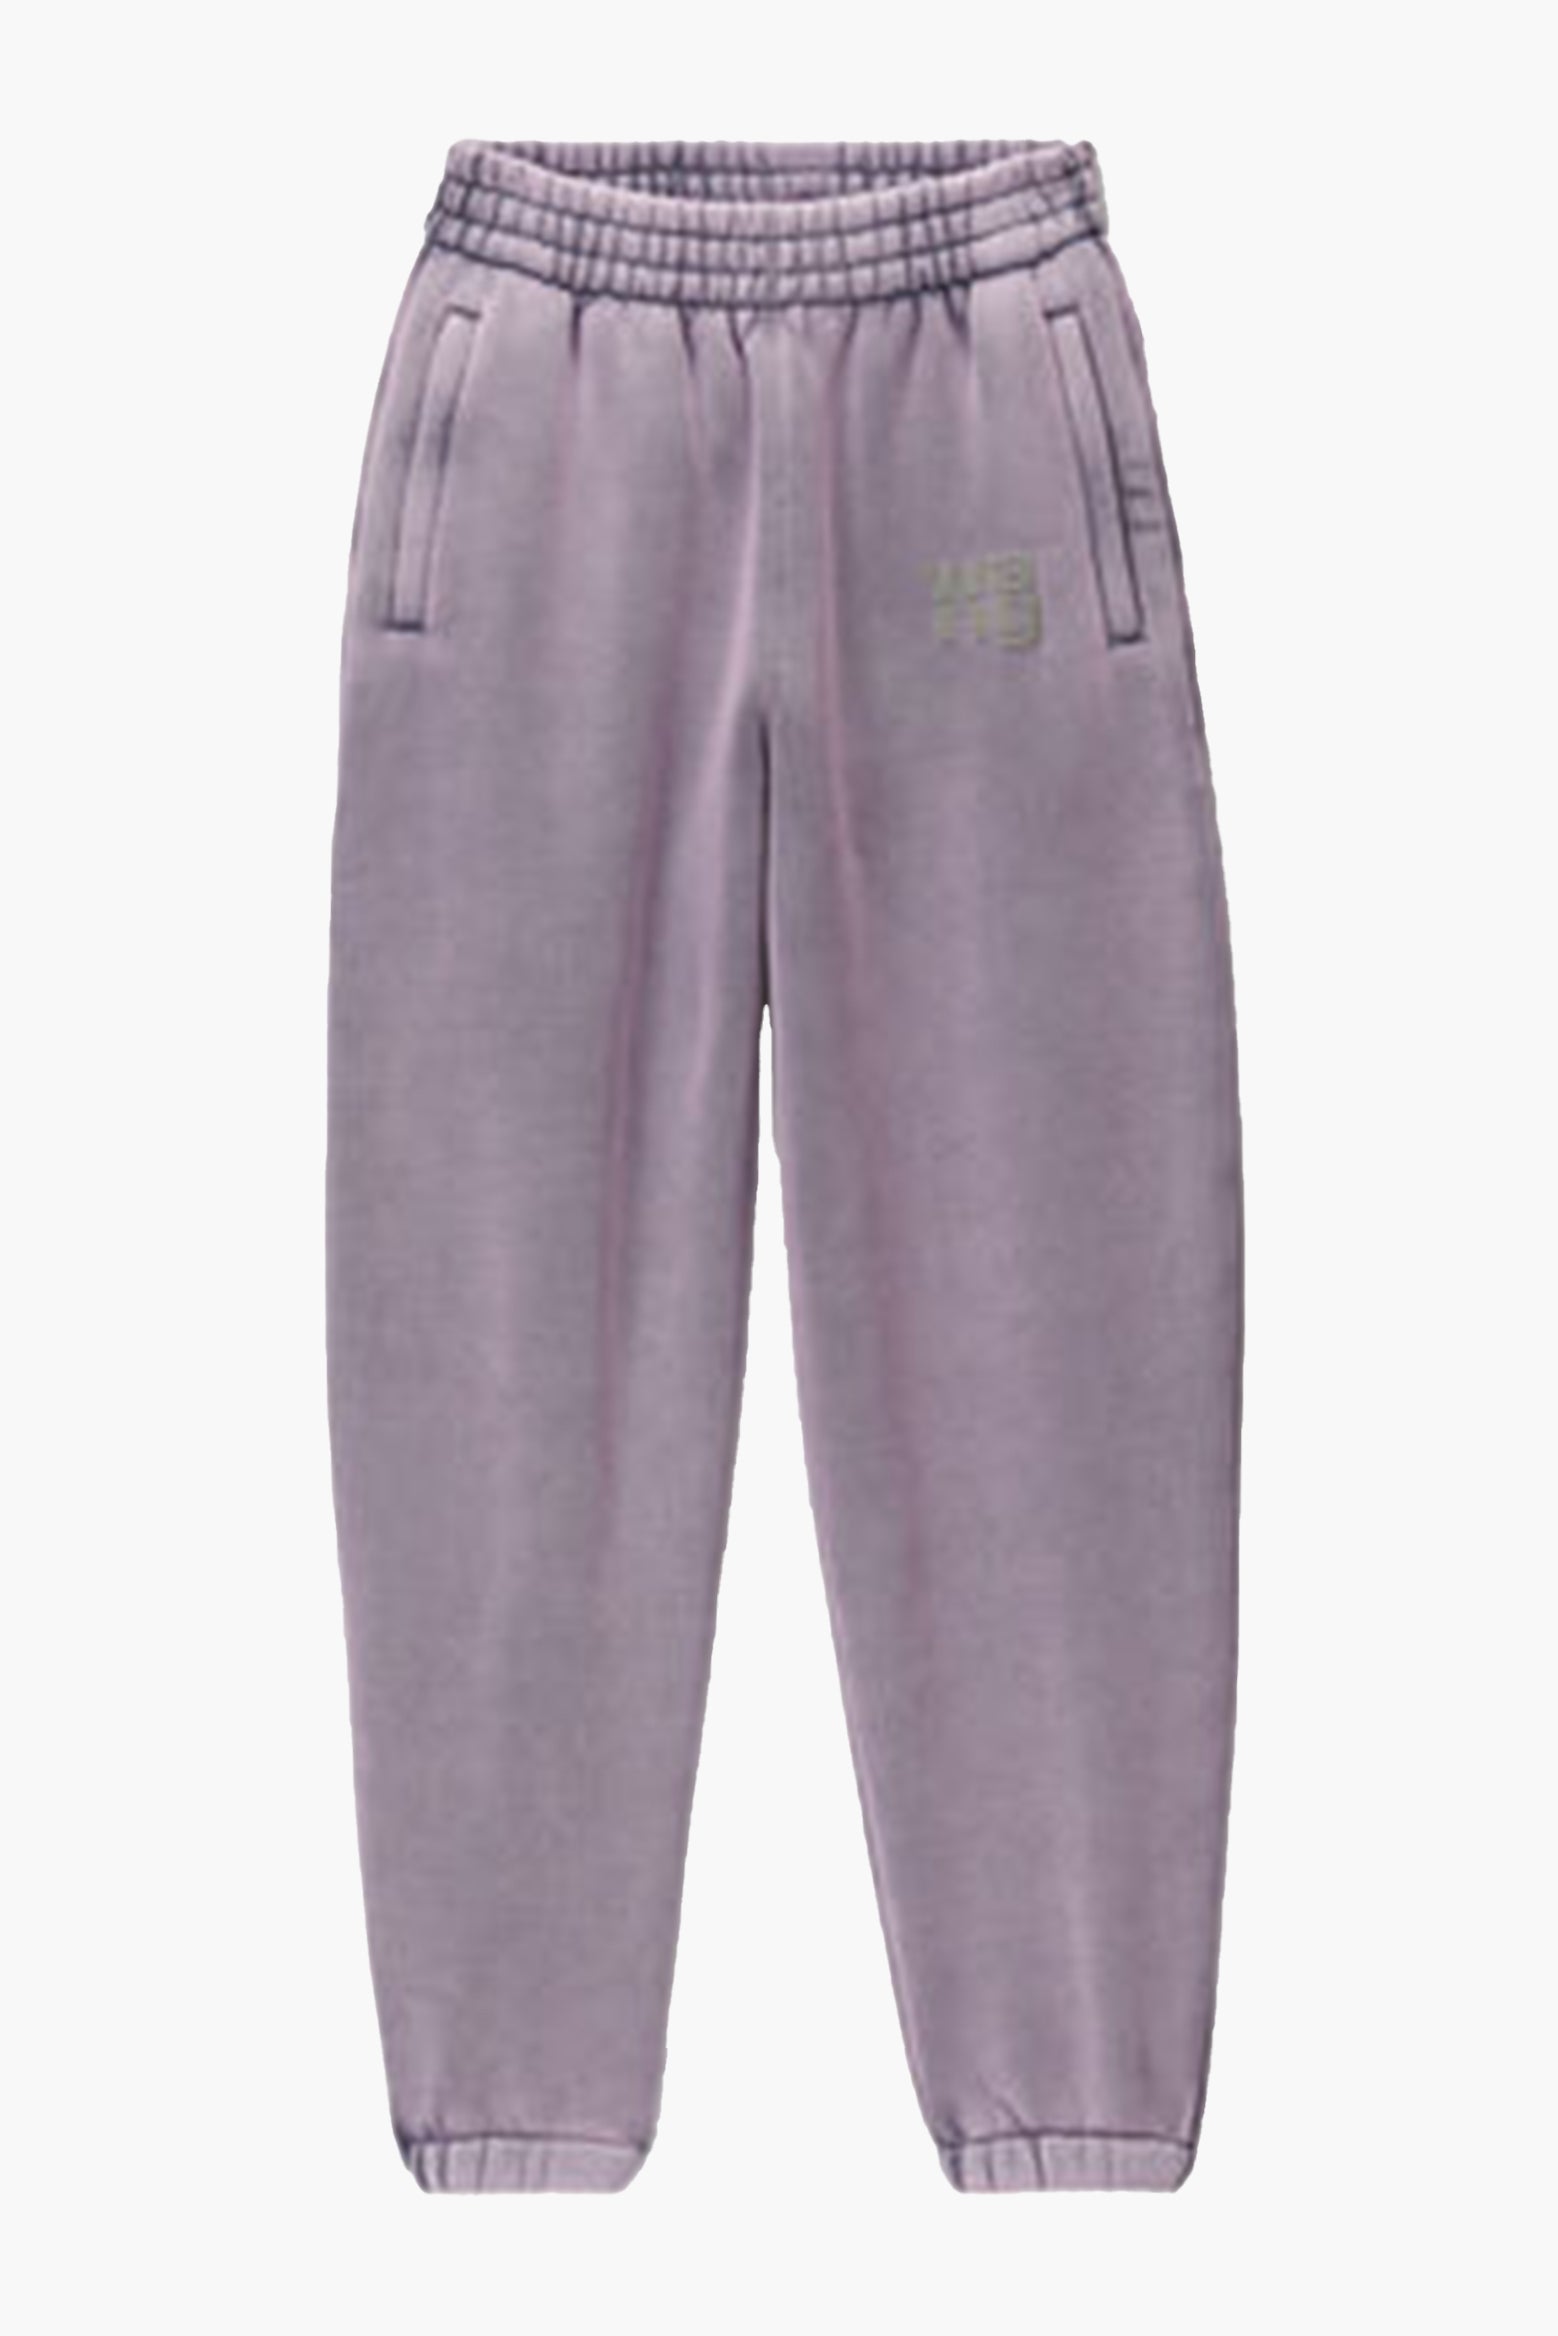 The ALEXANDER WANG Essential Terry Classic Sweatpant in Acid Pink Lavender available at The New Trend